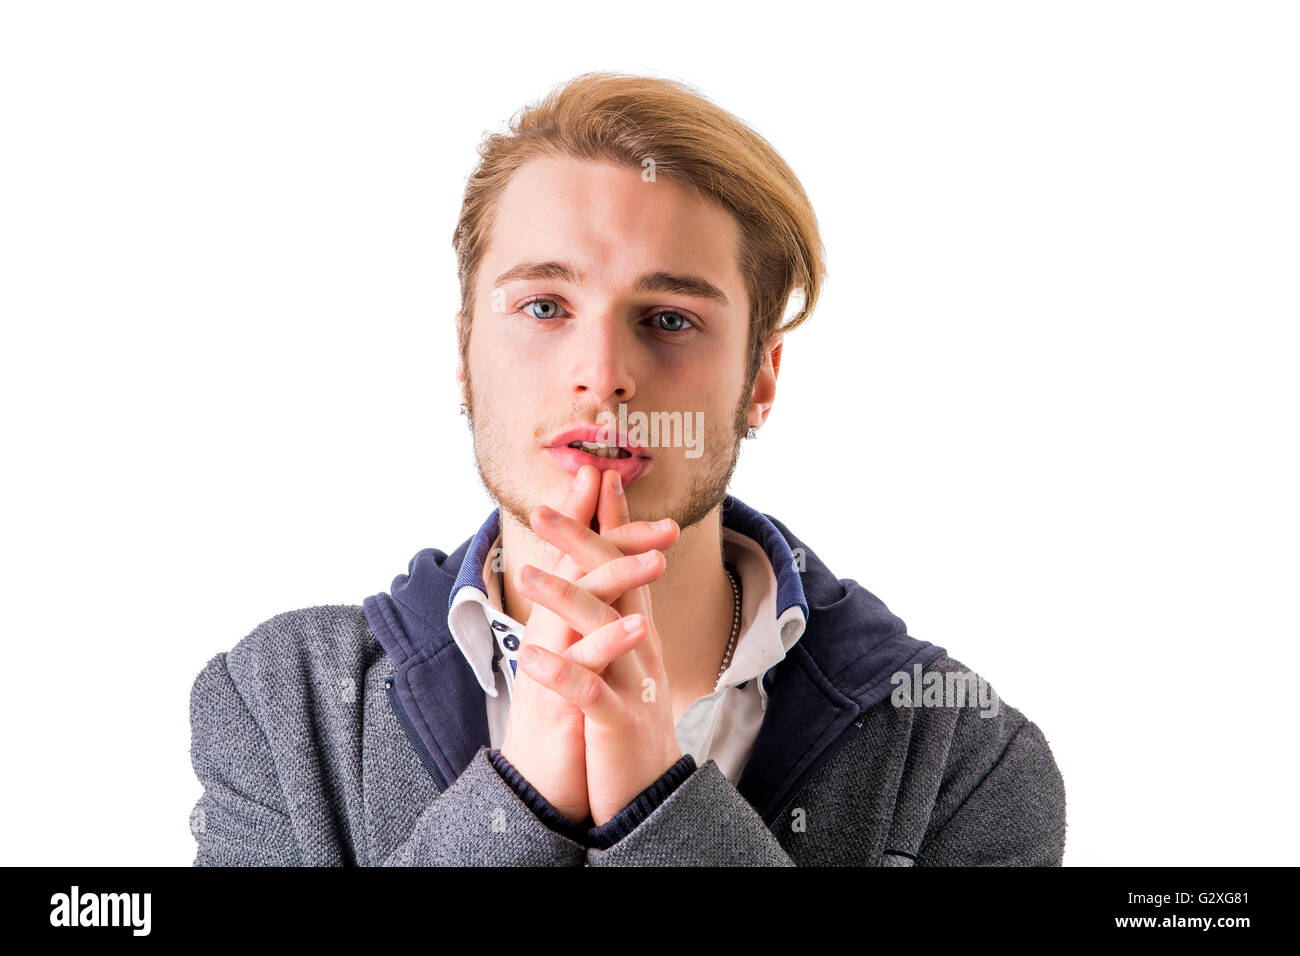 Needy, desperate young man pleading with hands joined as if praying to camera, isolated Stock Photo